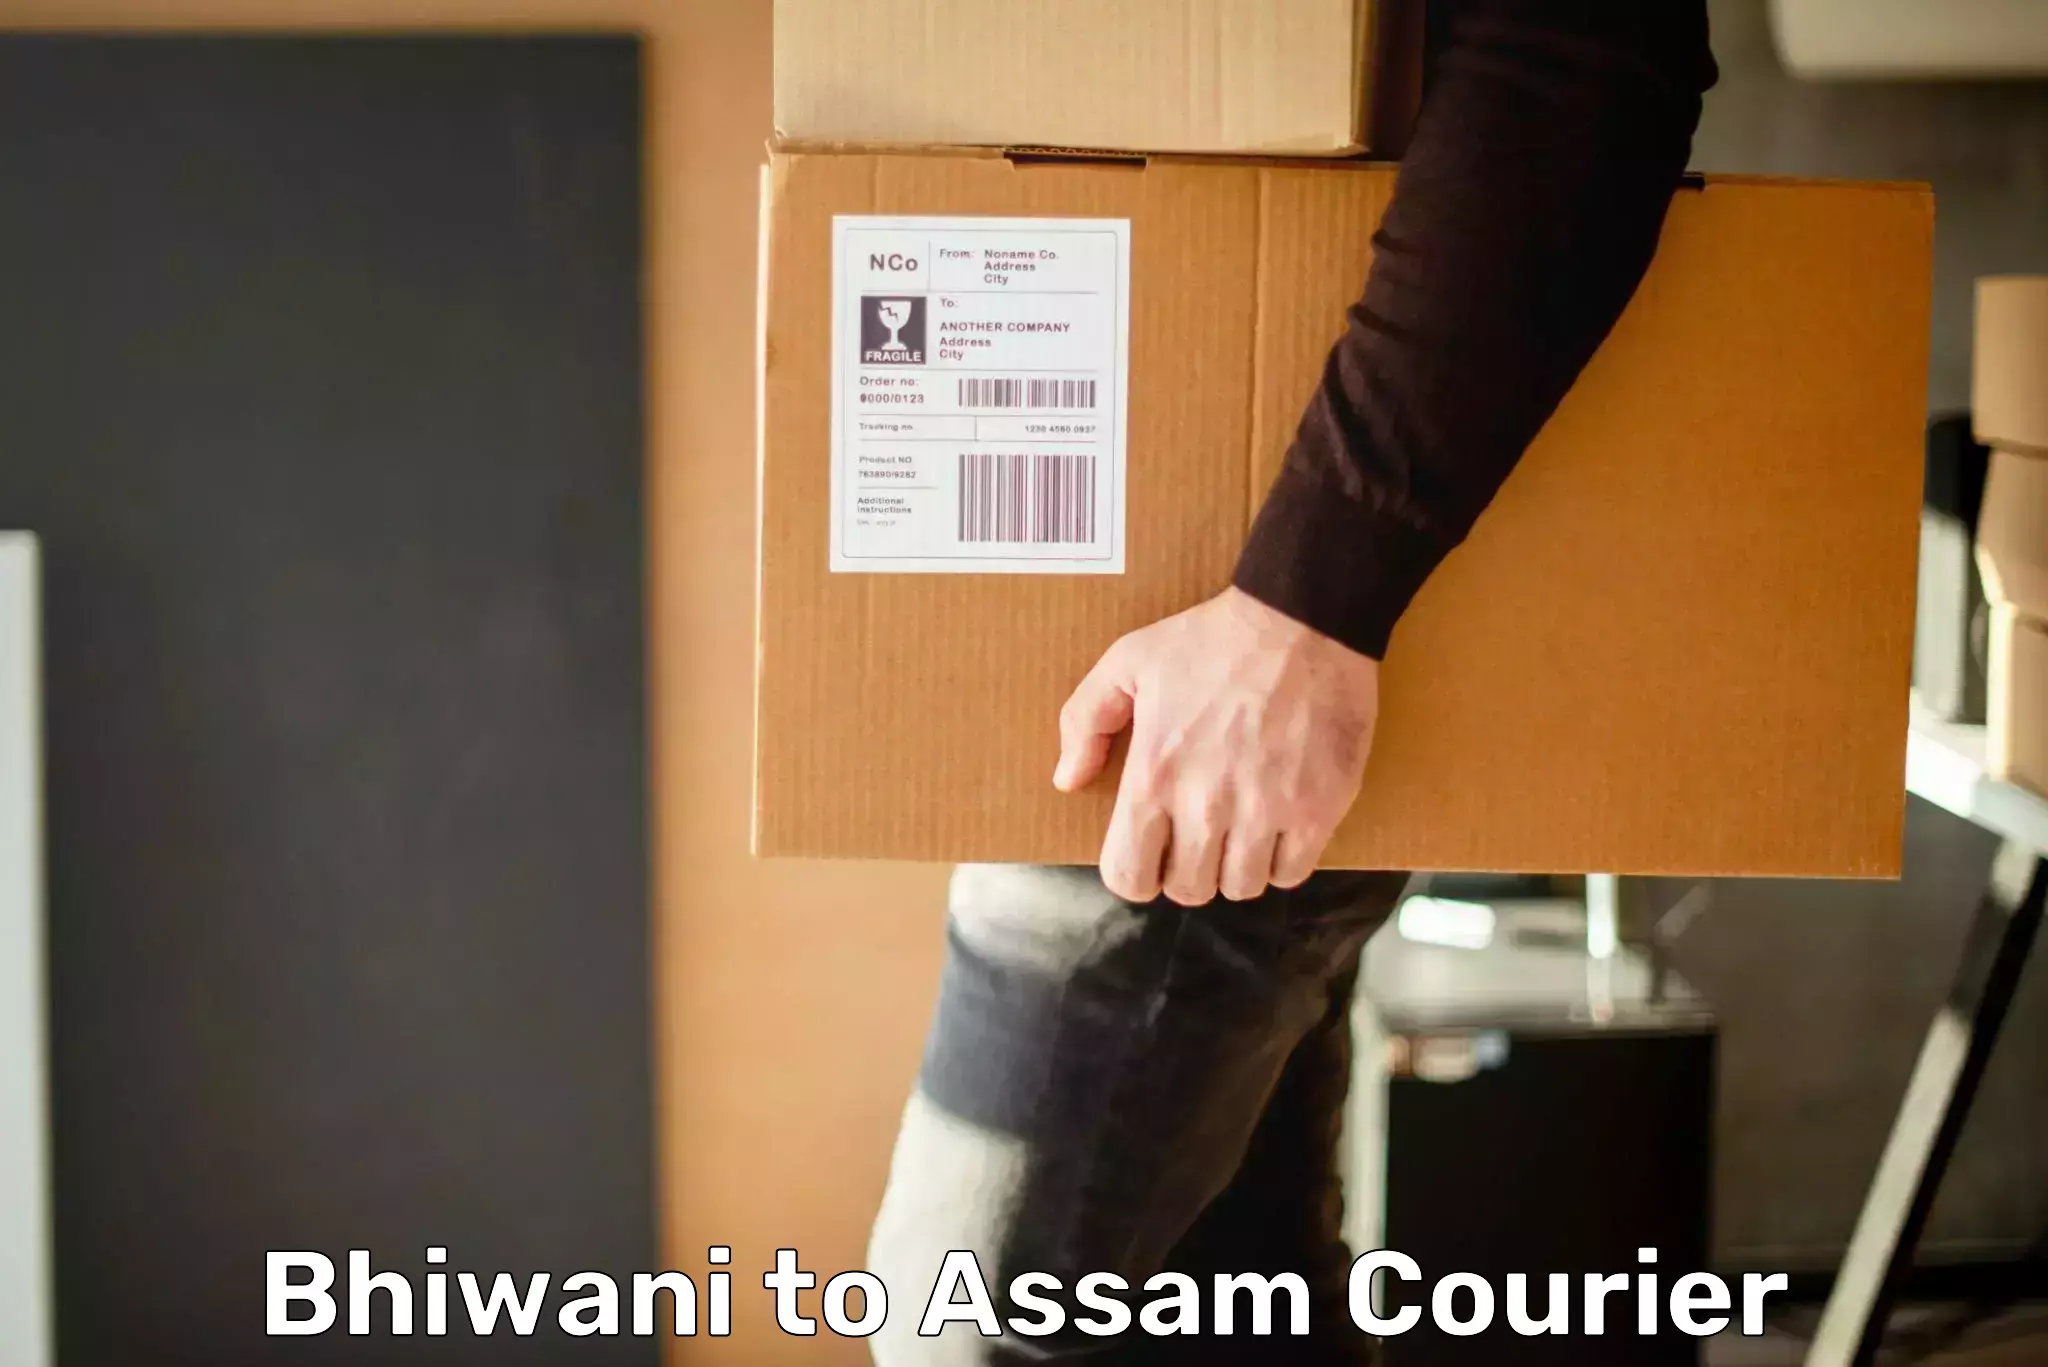 User-friendly delivery service Bhiwani to Assam